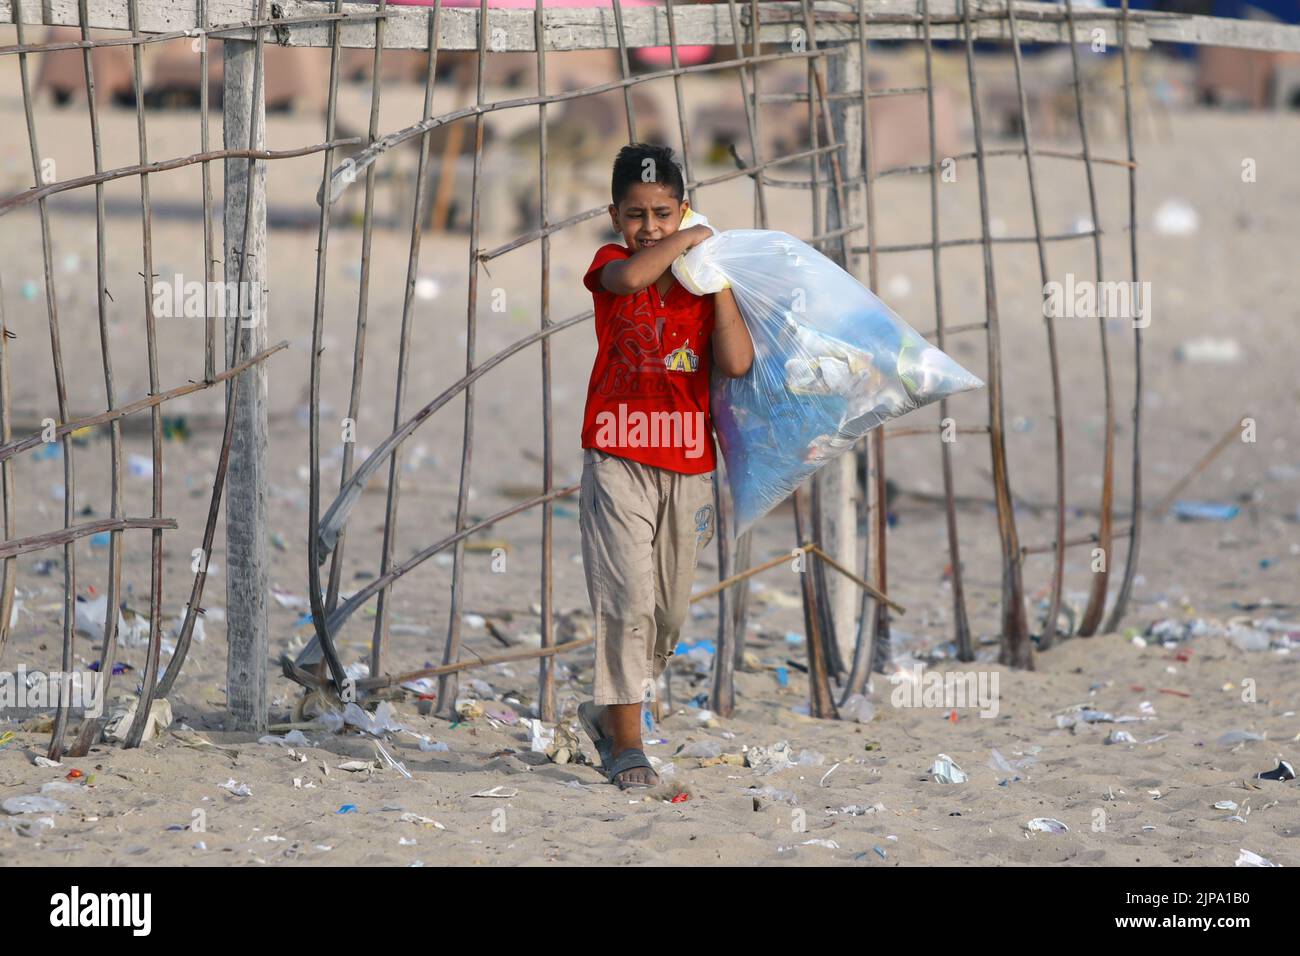 (220816) -- ALEXANDRIA, Aug. 16, 2022 (Xinhua) -- A child collects waste from the beach in Alexandria, Egypt, Aug. 13, 2022. On the beaches in the Egyptian city of Alexandria, a group of Egyptian young people are usually seen holding green and white plastic bags to collect the scattering waste. They are participants in a cleanup campaign organized by Banlastic Egypt, an environmental project launched by a group of youth in the Mediterranean city. The project seeks to raise the public's awareness of plastic pollution and how single-use plastic waste harms marine life if it eventually ends Stock Photo